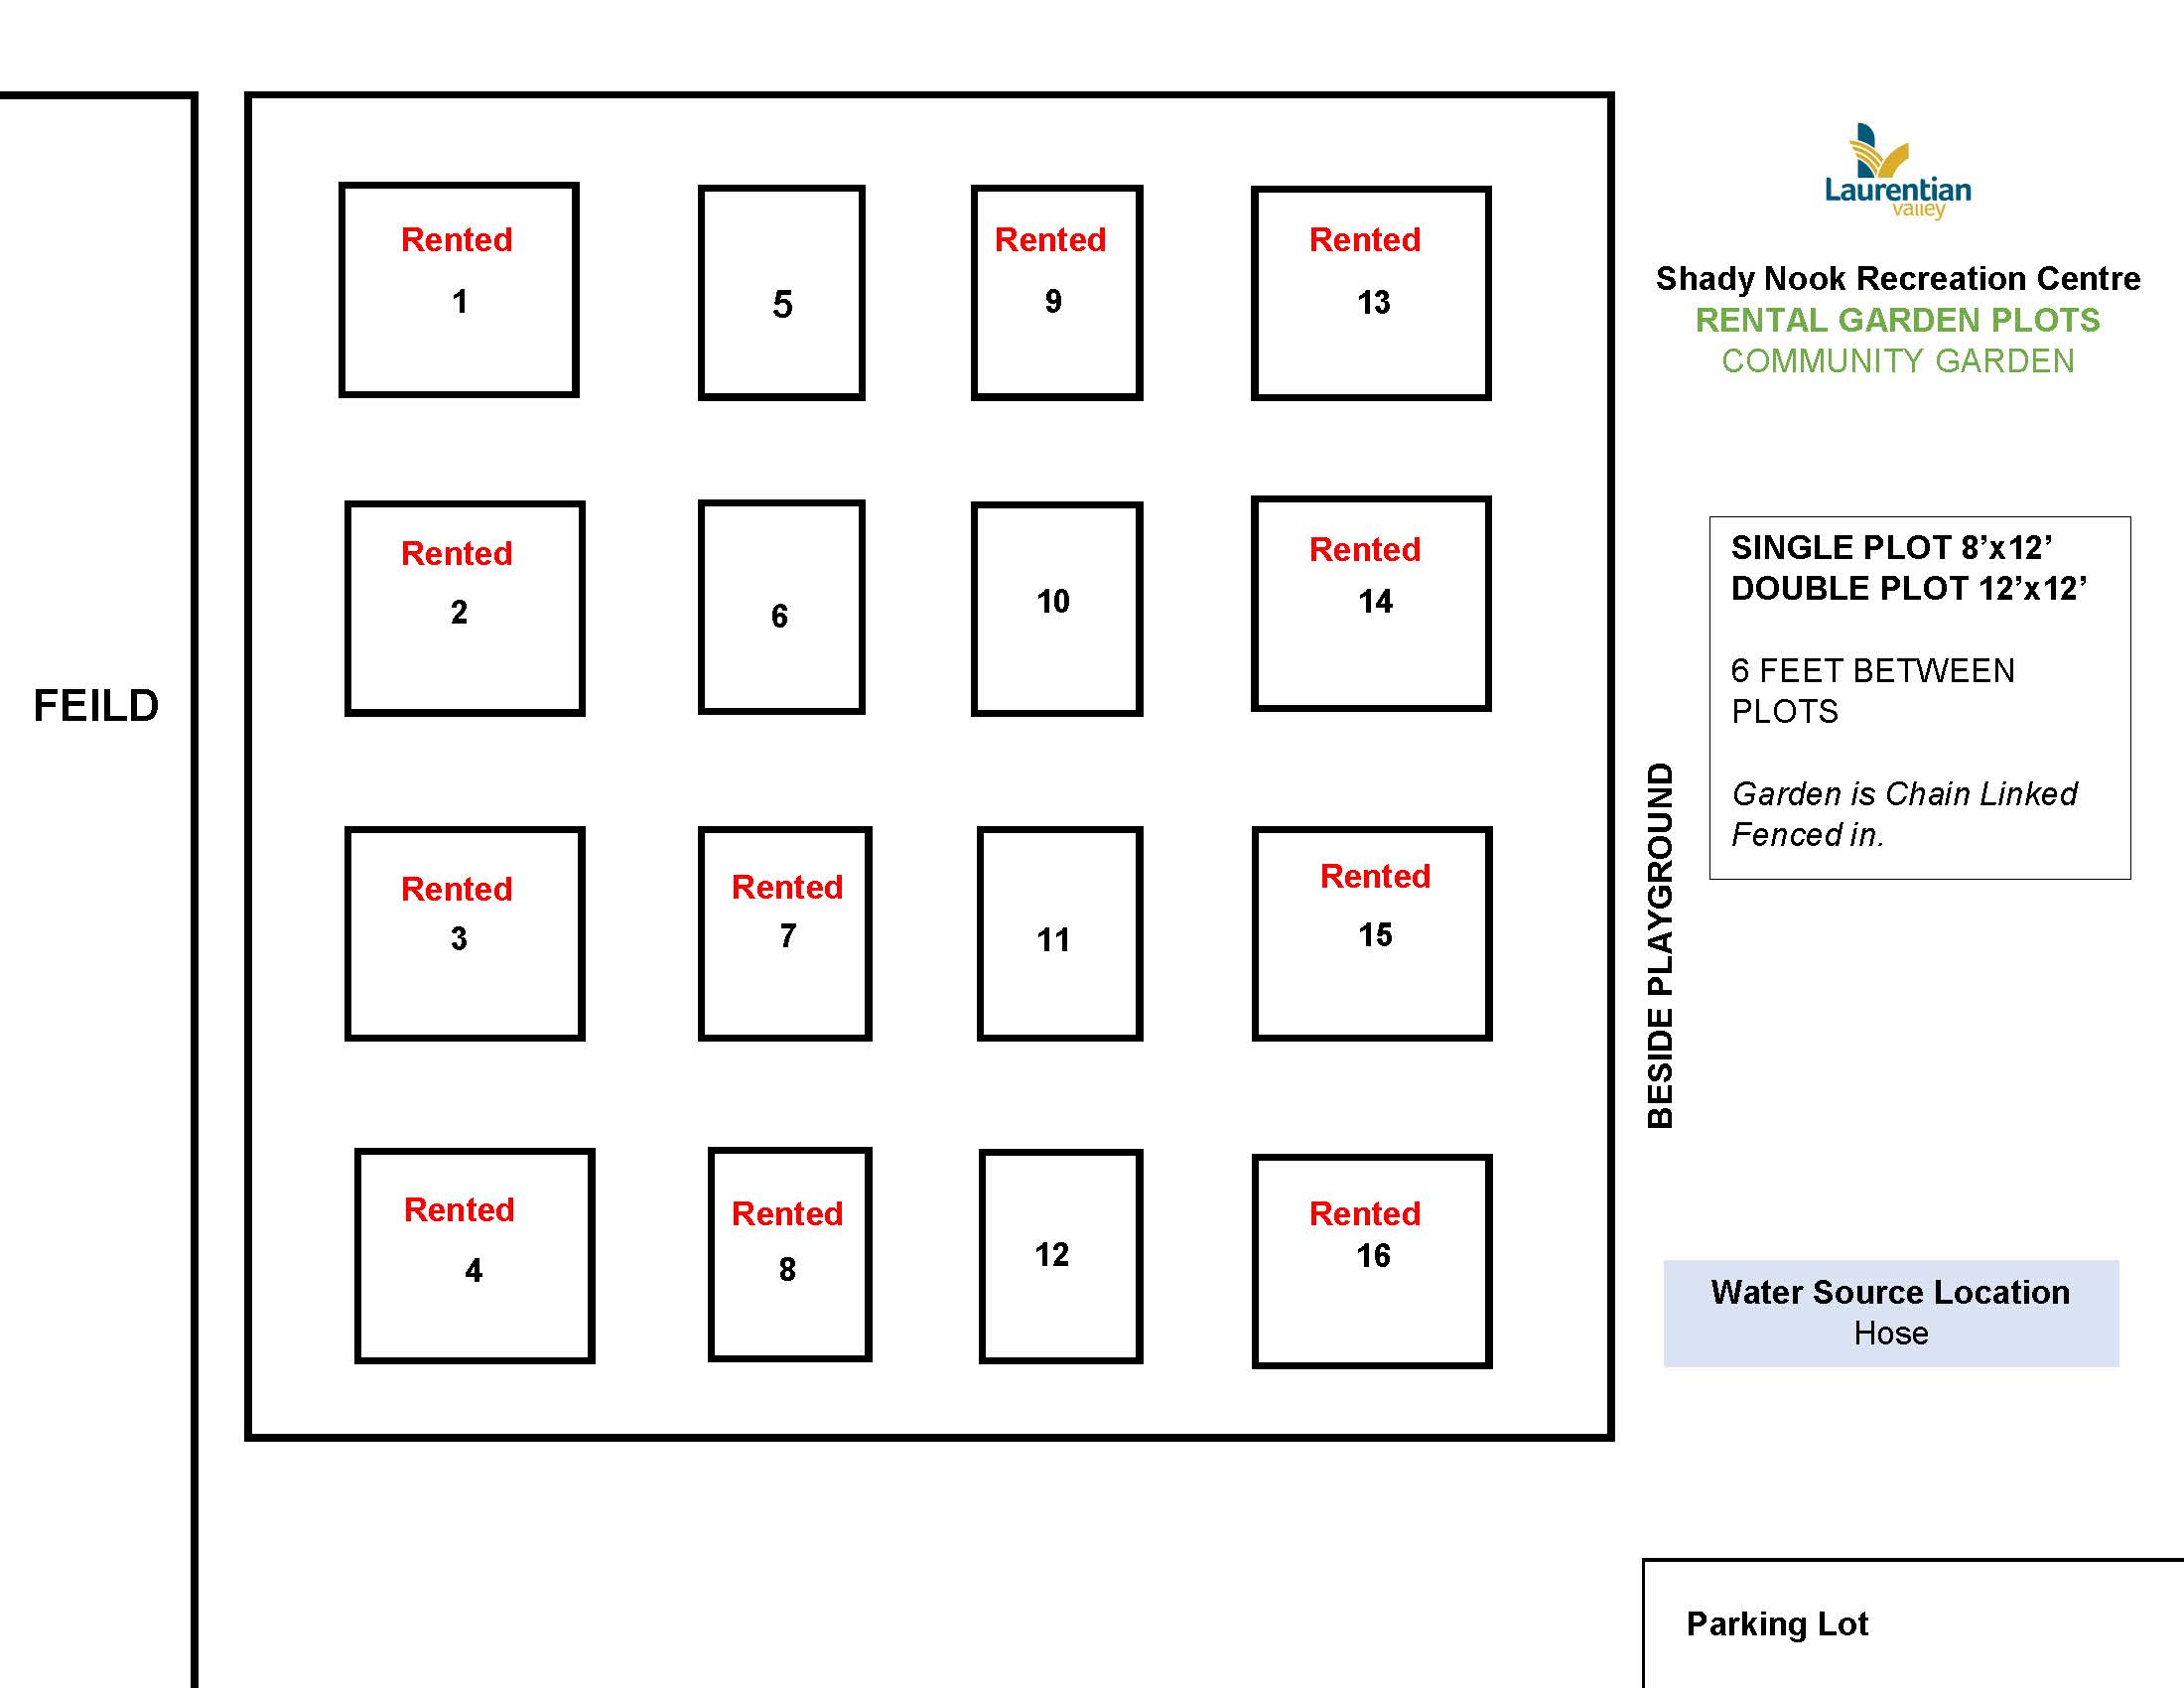 Image of available plots at Shady Nook Rec Centre.